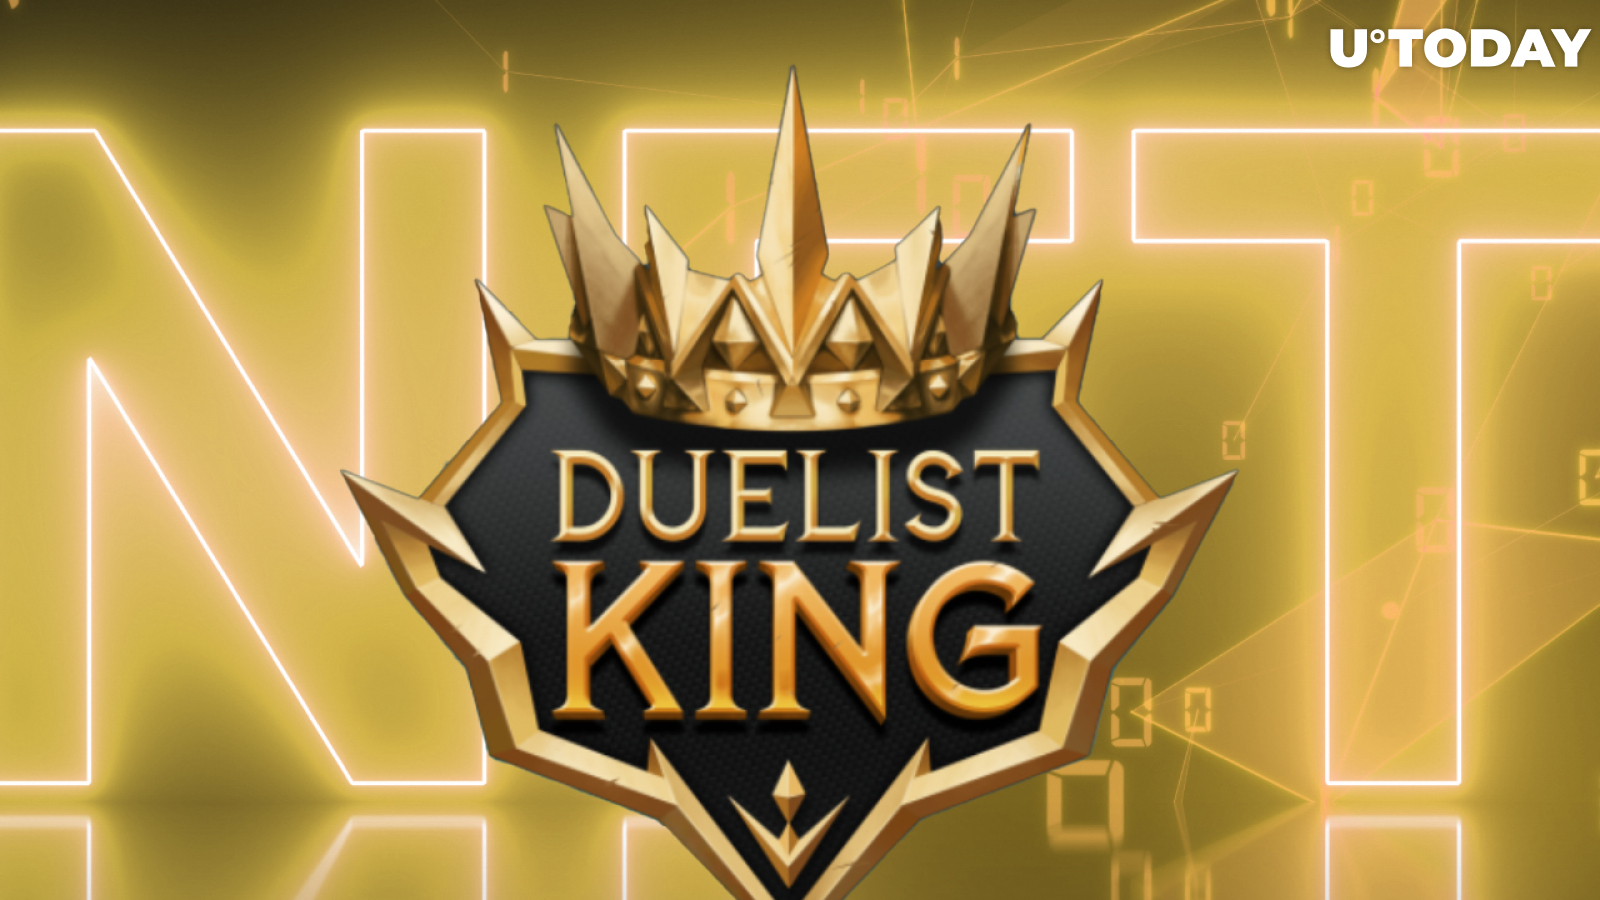 Duelist King to Conduct Its Second NFT Card Sale on Dec. 15